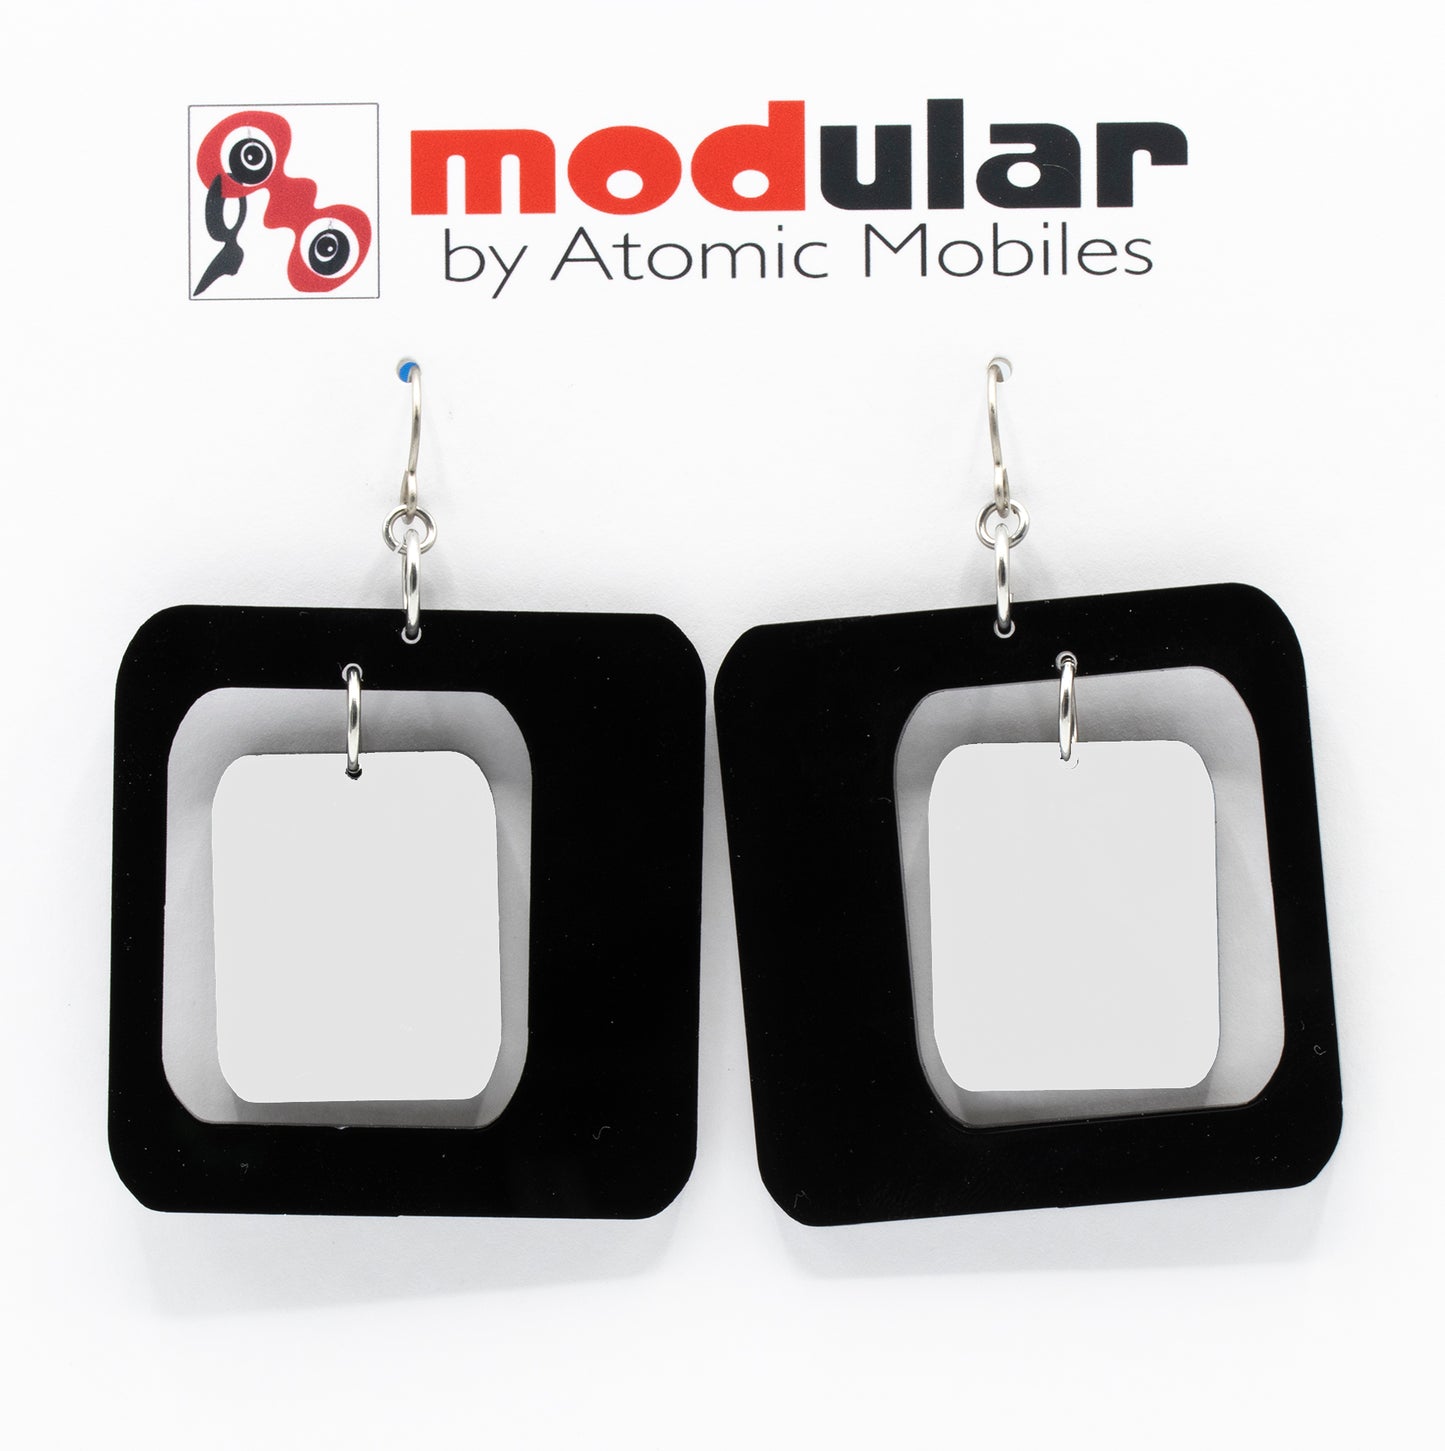 MODular Earrings - Coolsville Statement Earrings in Black and White by AtomicMobiles.com - retro era inspired mod handmade jewelry